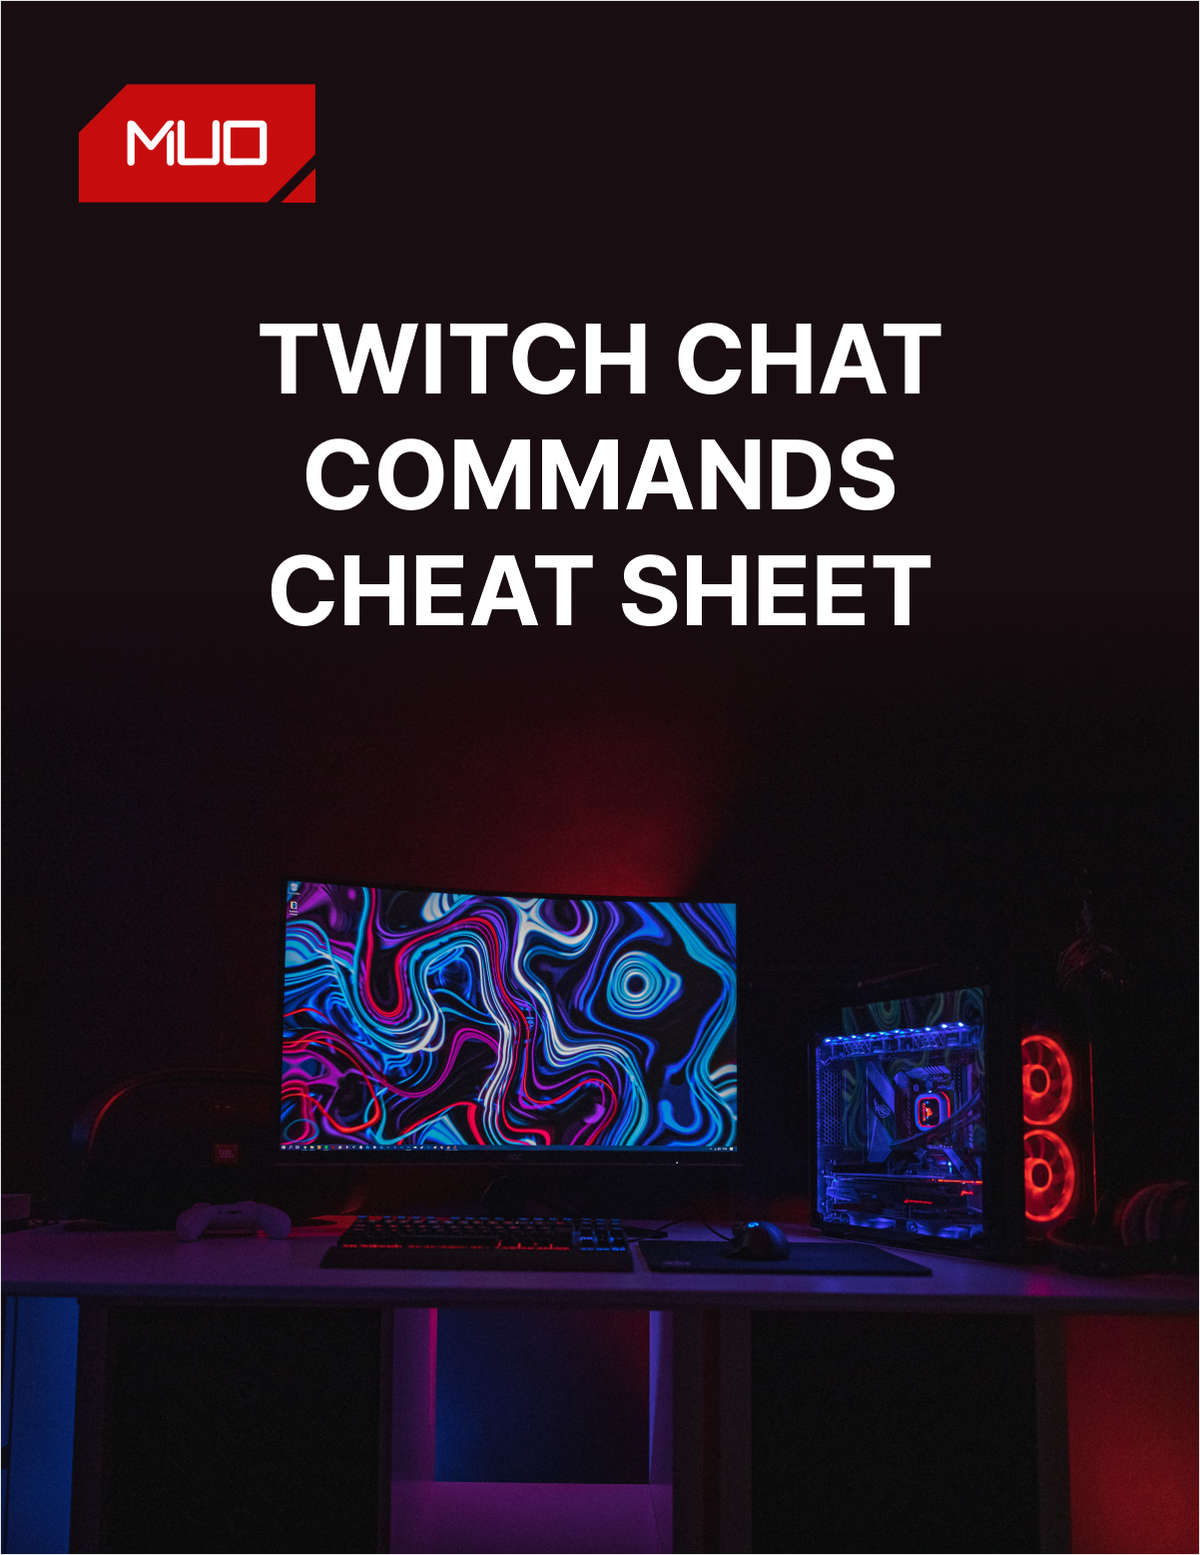 Every Twitch Chat Command You Need to Know